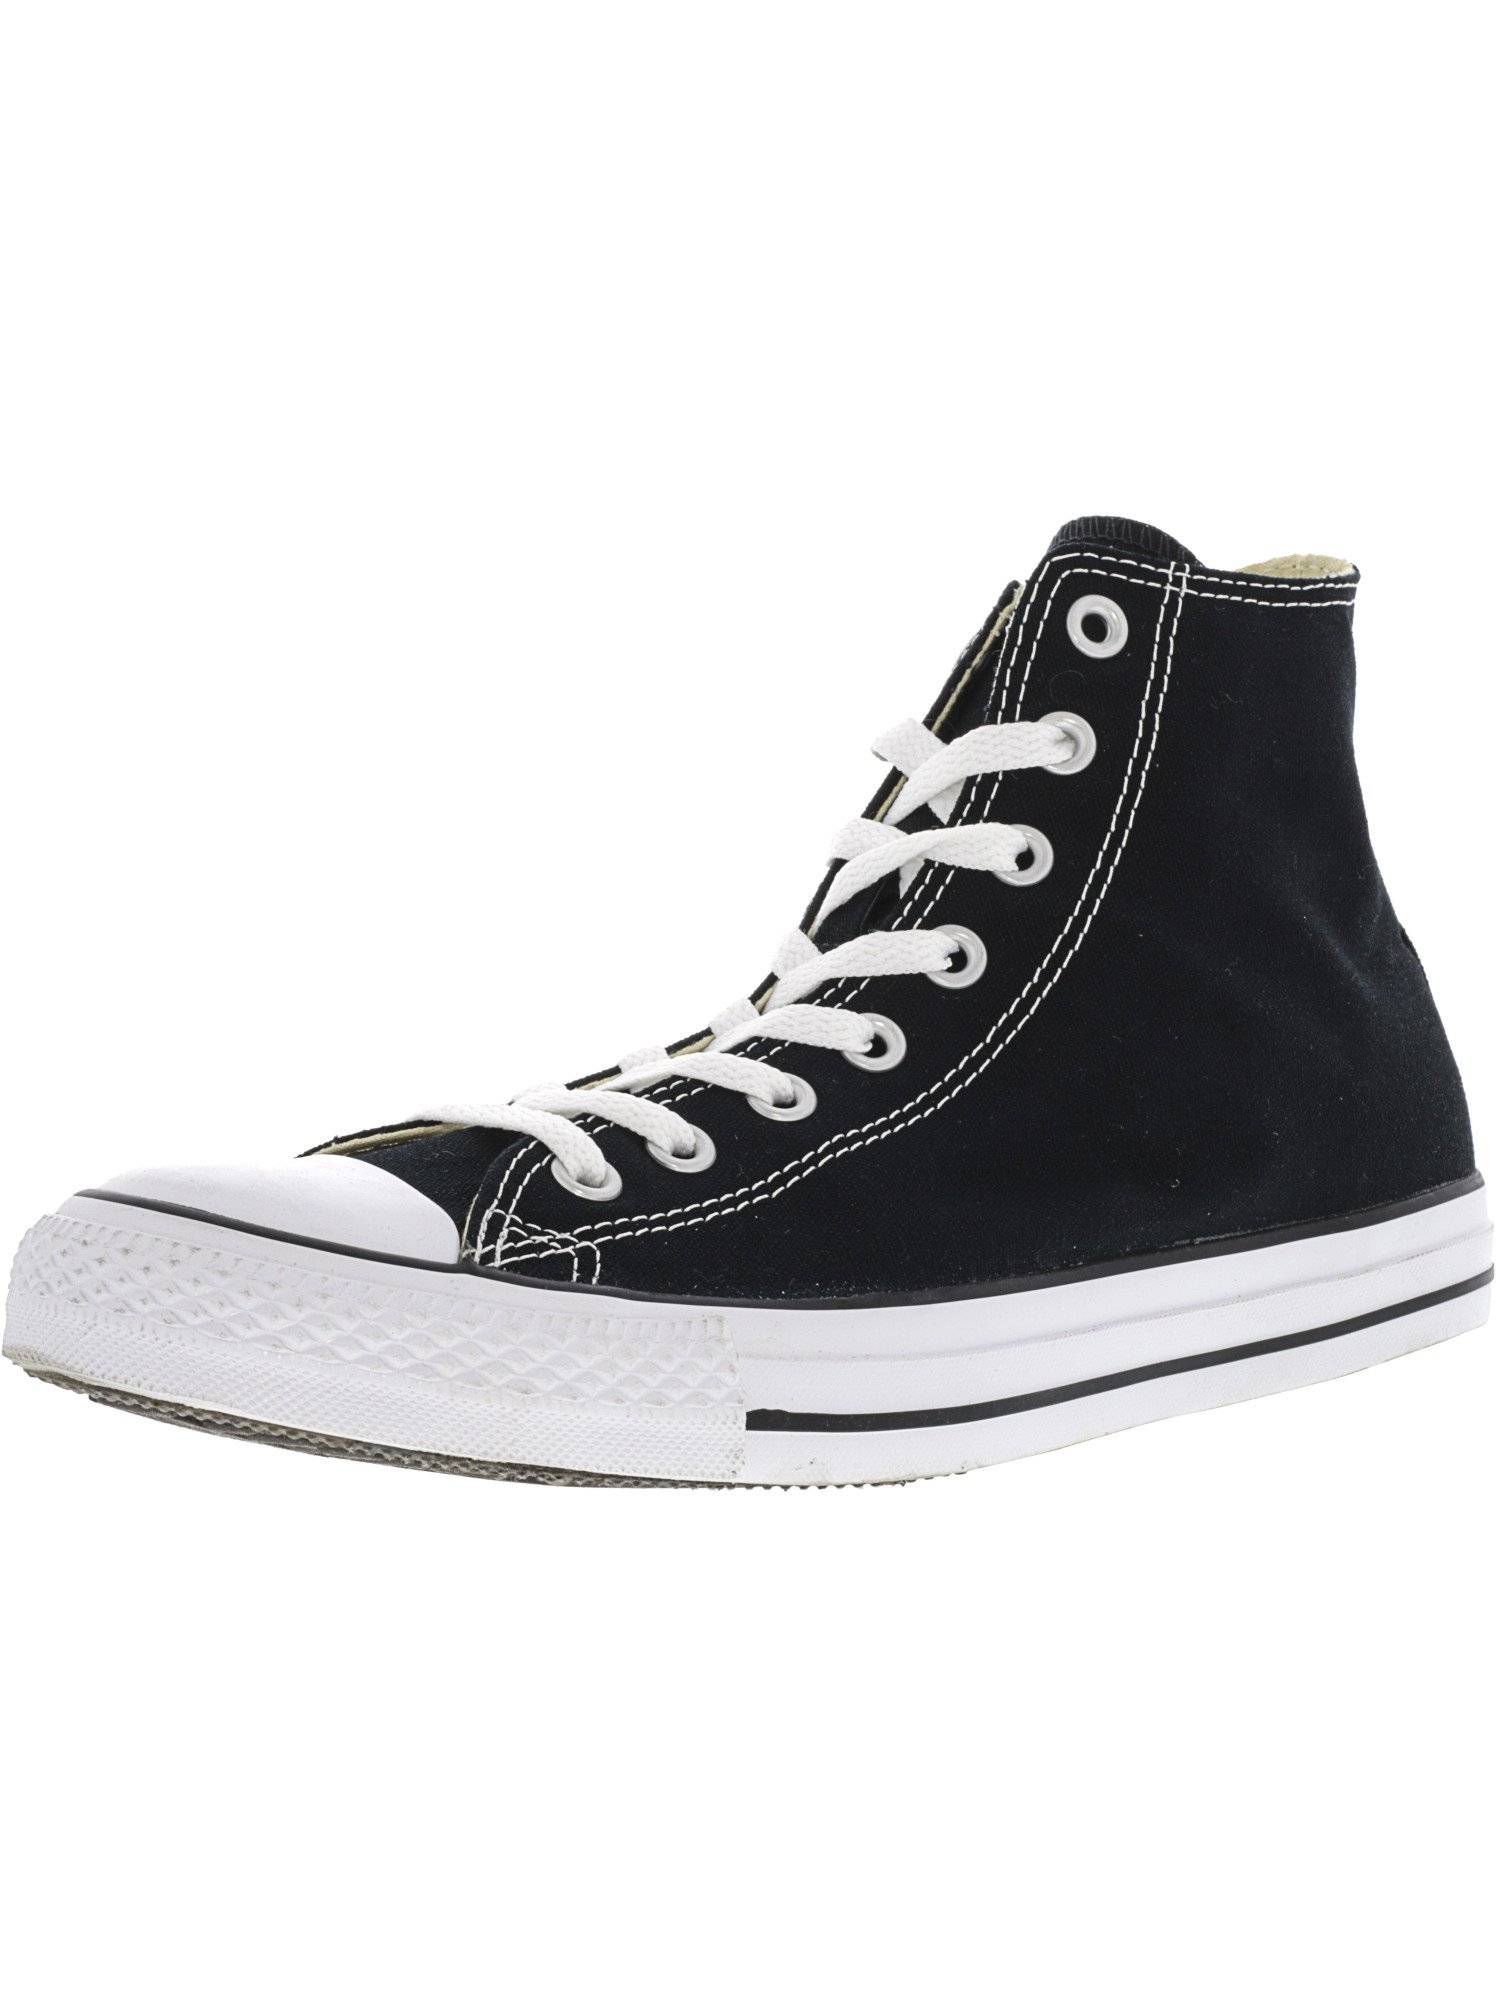 Converse Unisex Chuck Taylor All Star High Top - image 1 of 3